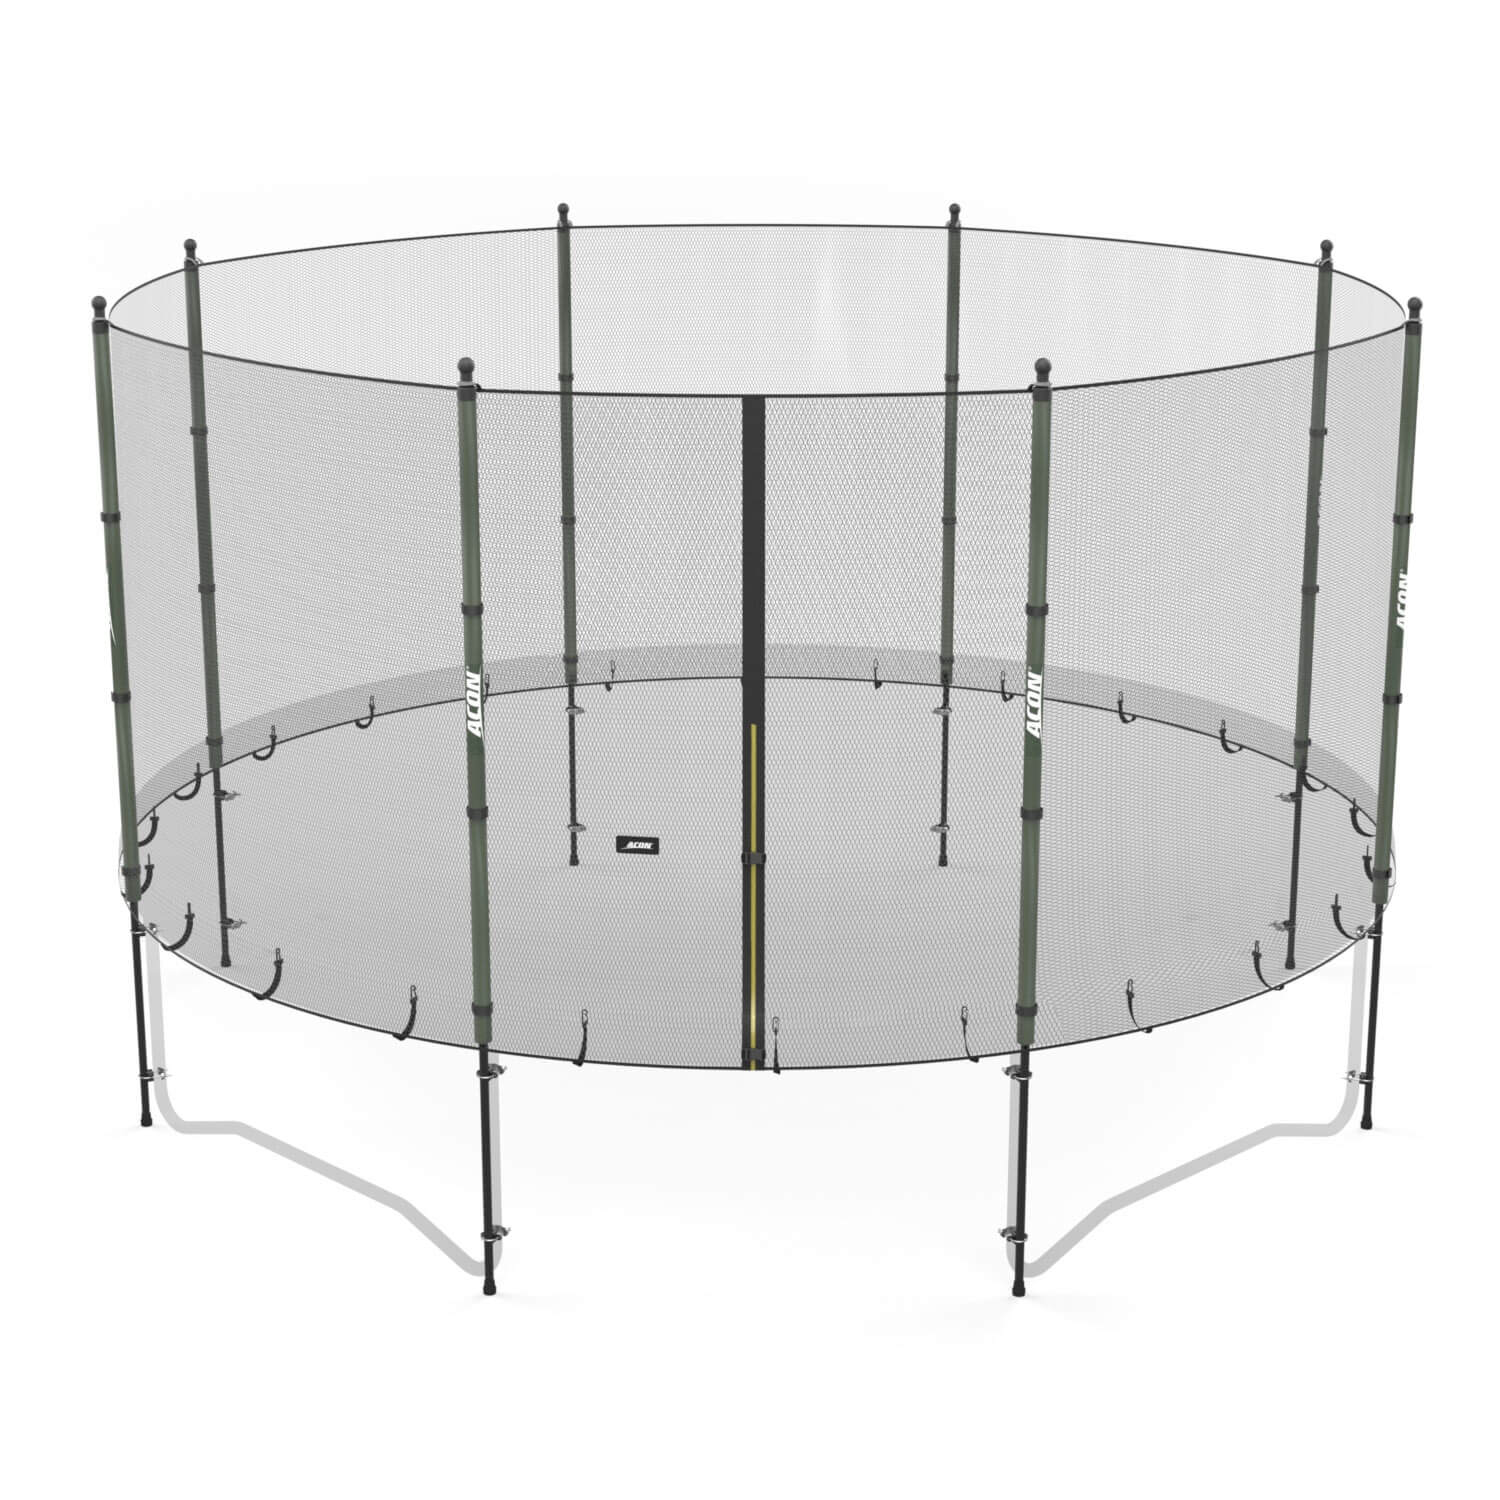 ACON Standard Enclosure attached to the trampoline.